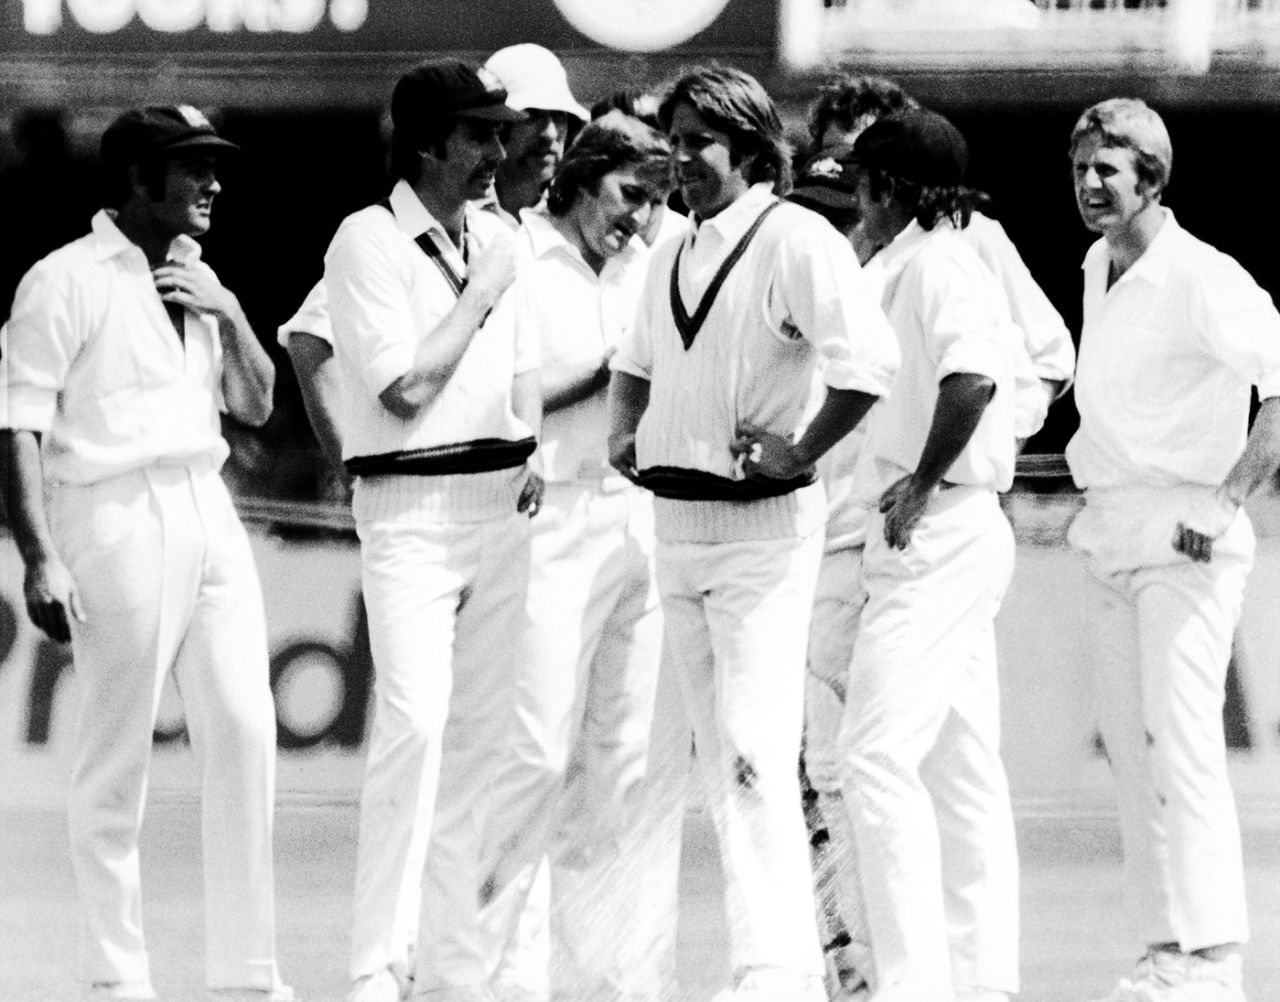 Jeff Thomson, Greg Chappell and other Australian players surround Gary Gilmour after a wicket, Australia v West Indies, World Cup final, Lord's, June 21, 1975